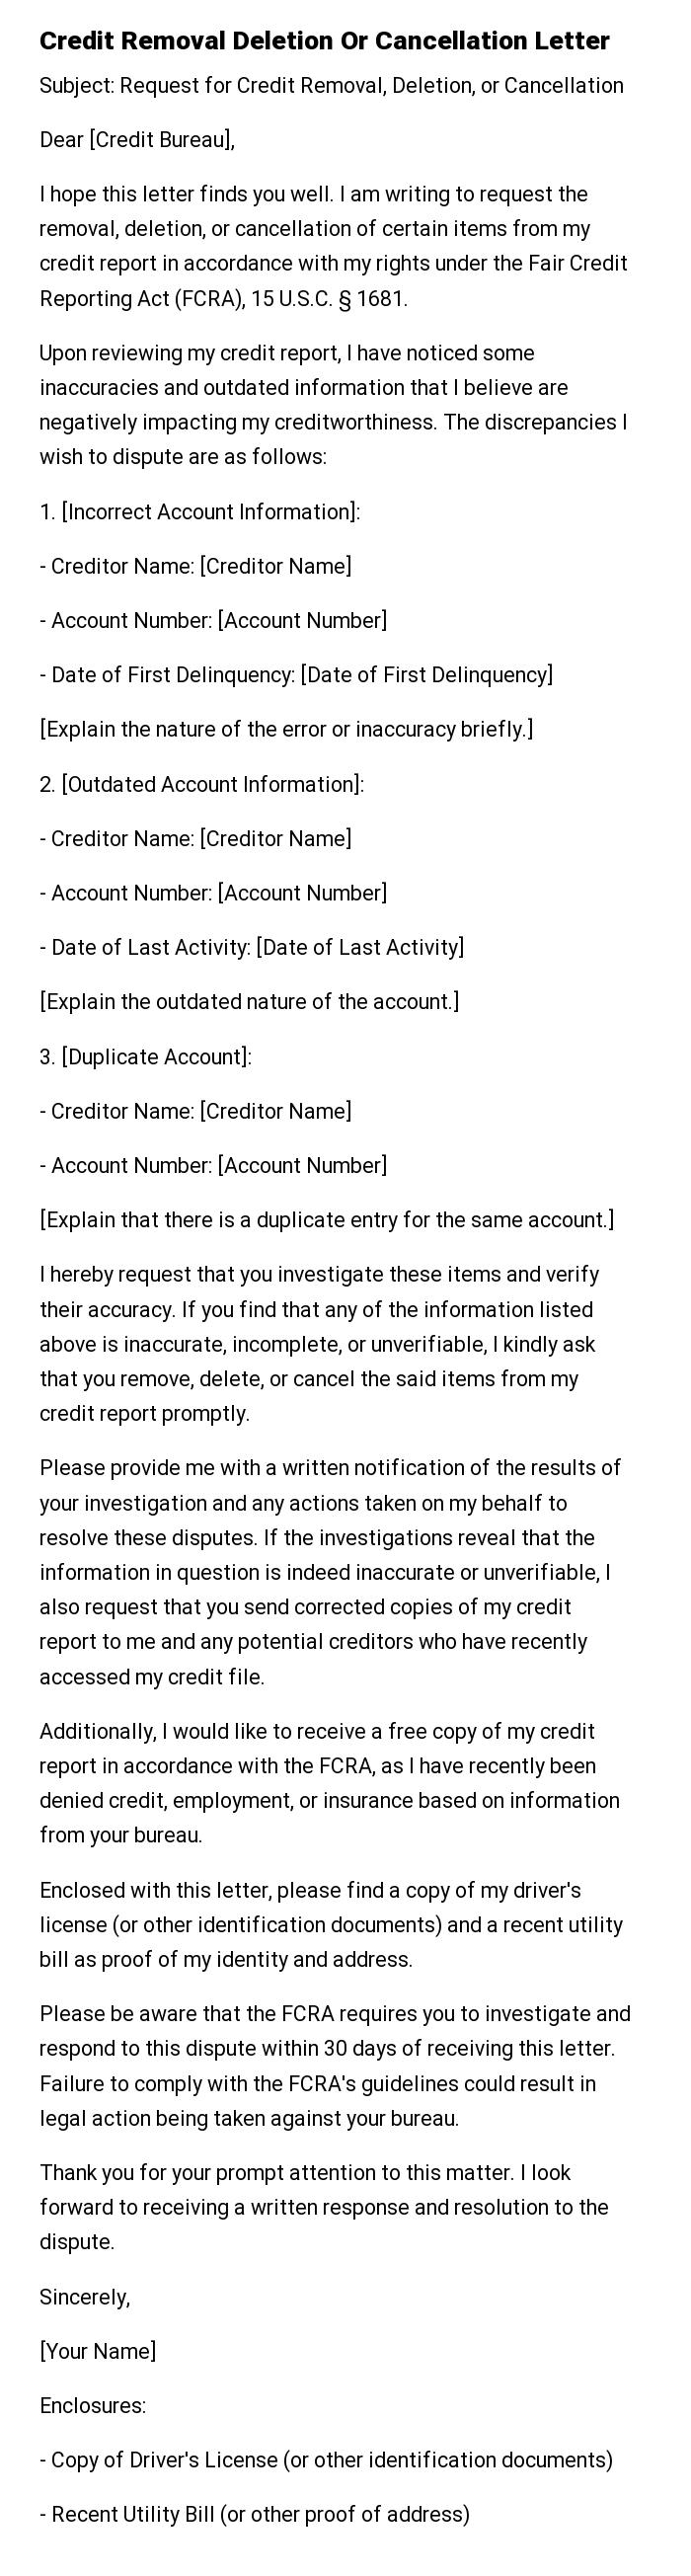 Credit Removal Deletion Or Cancellation Letter